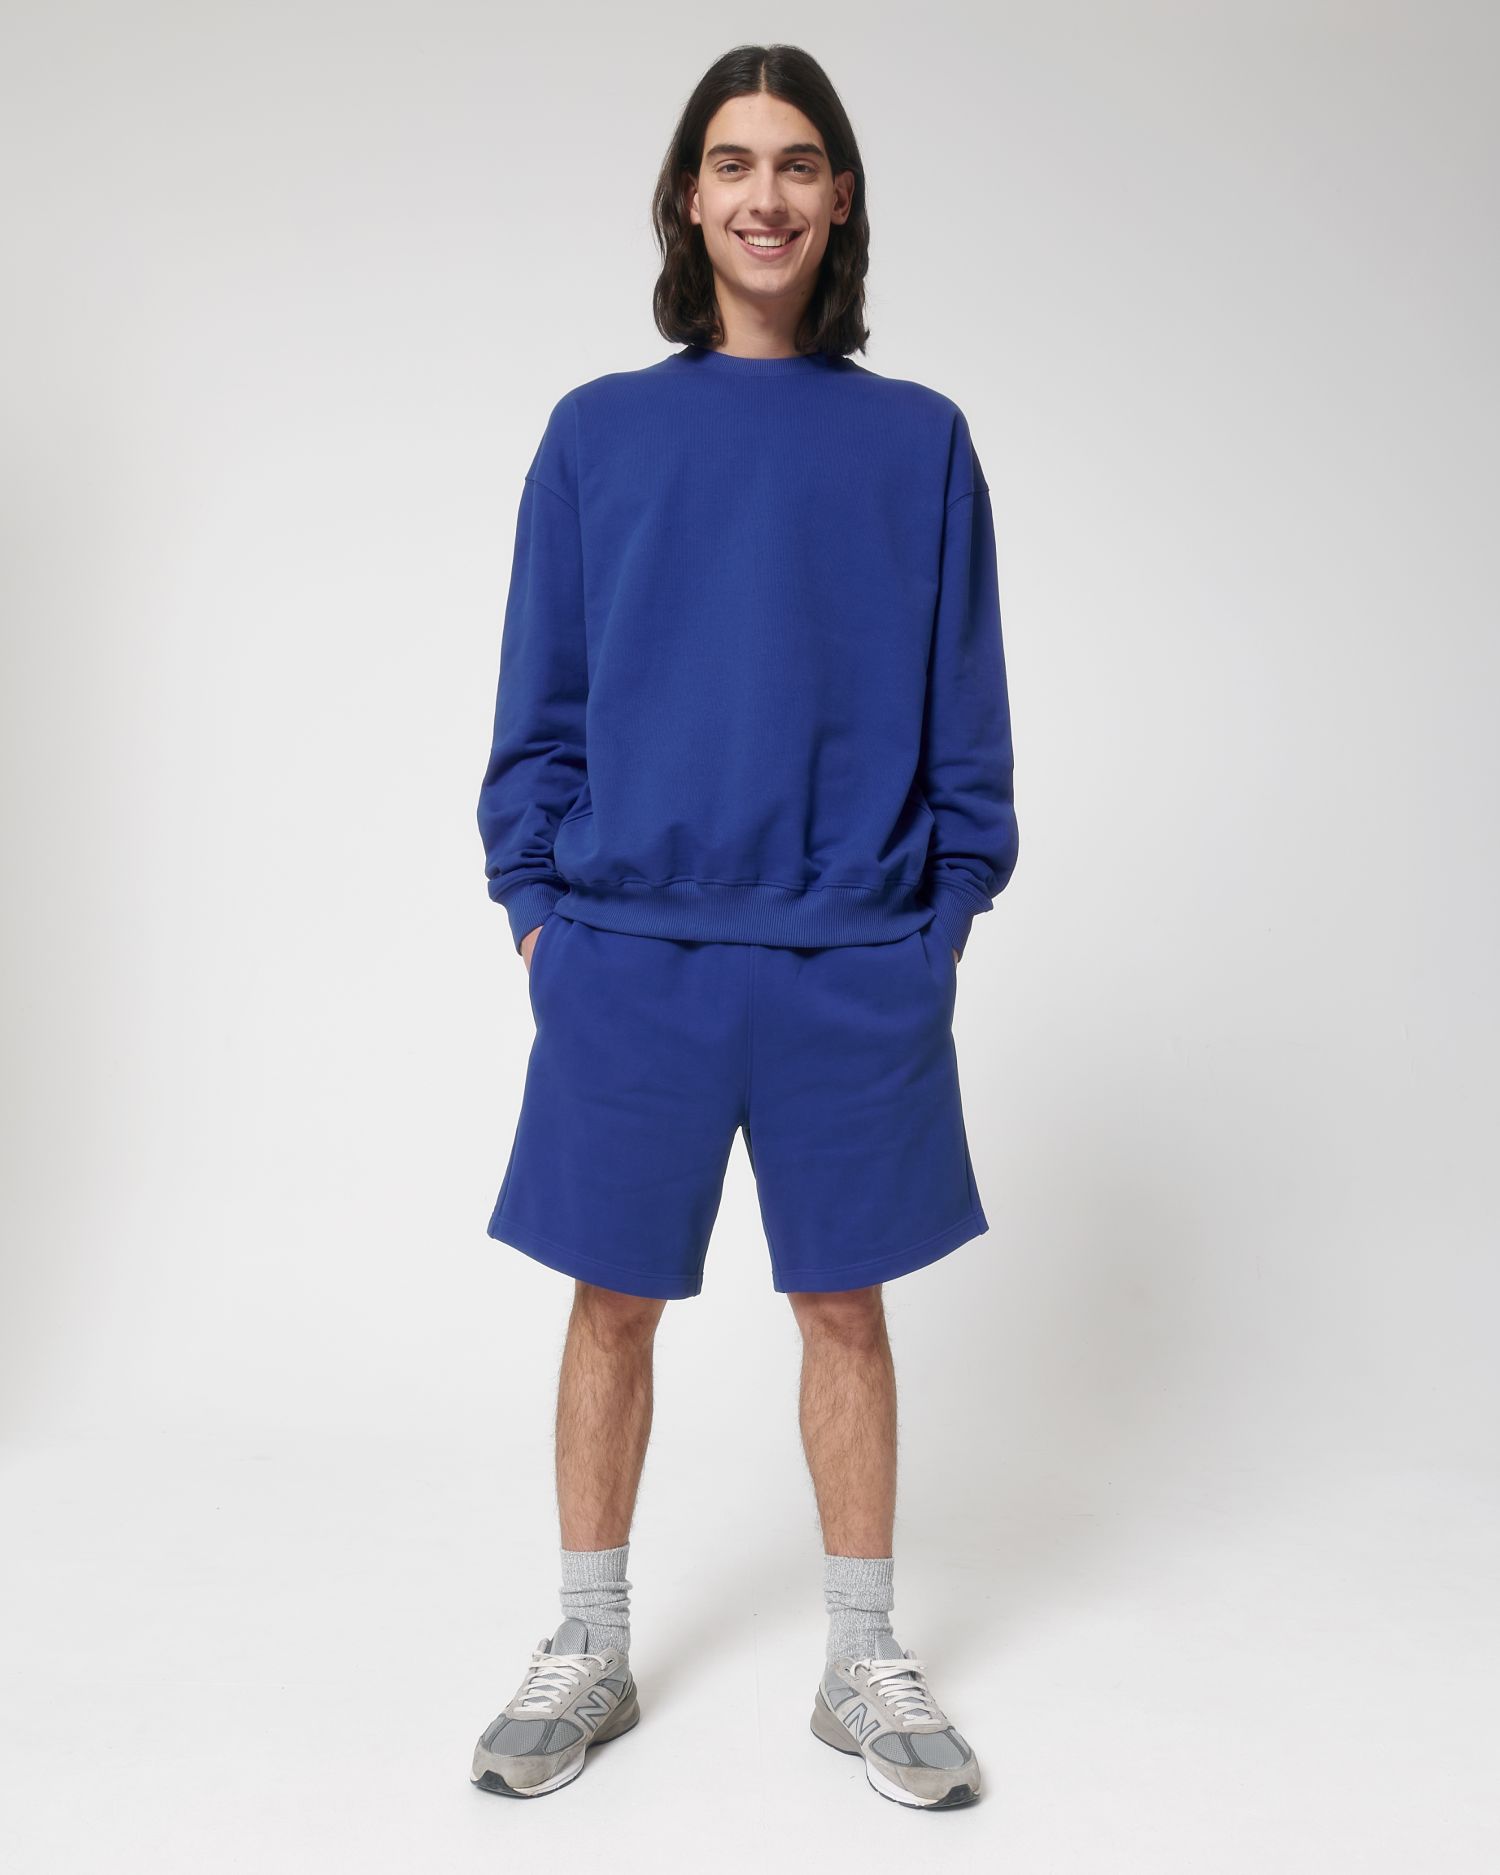 Crew neck sweatshirts Ledger Dry in Farbe Worker Blue